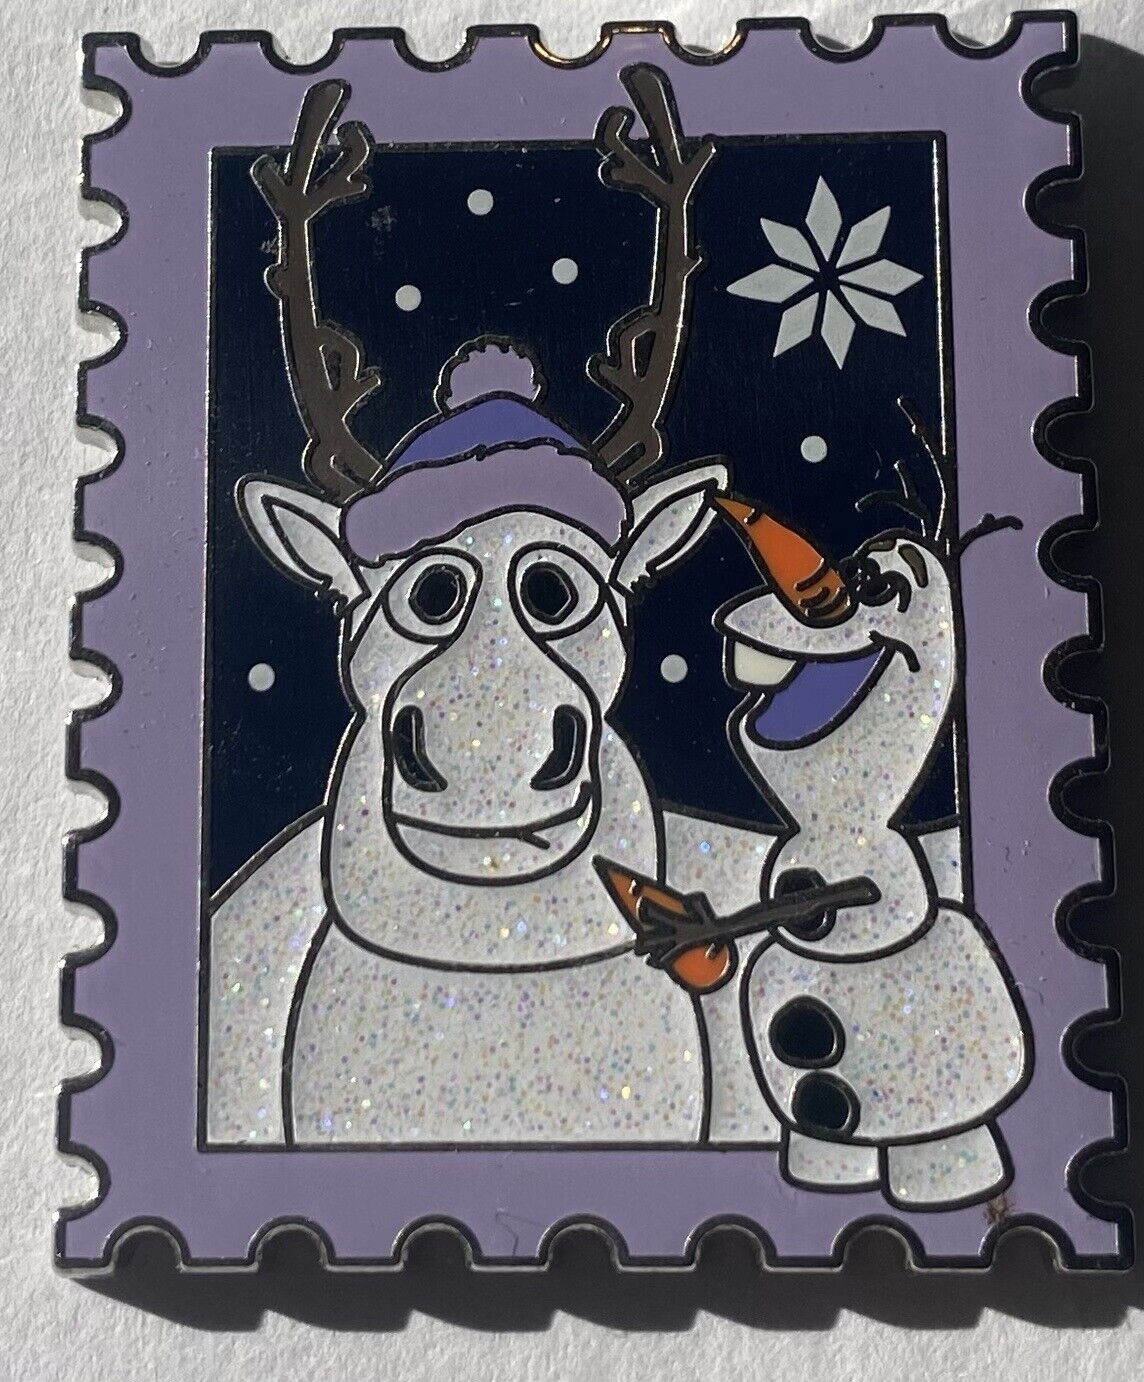 Disney Parks Holiday Christmas Stamp Olaf Sven Glitter Snowman Frozen LE Pin